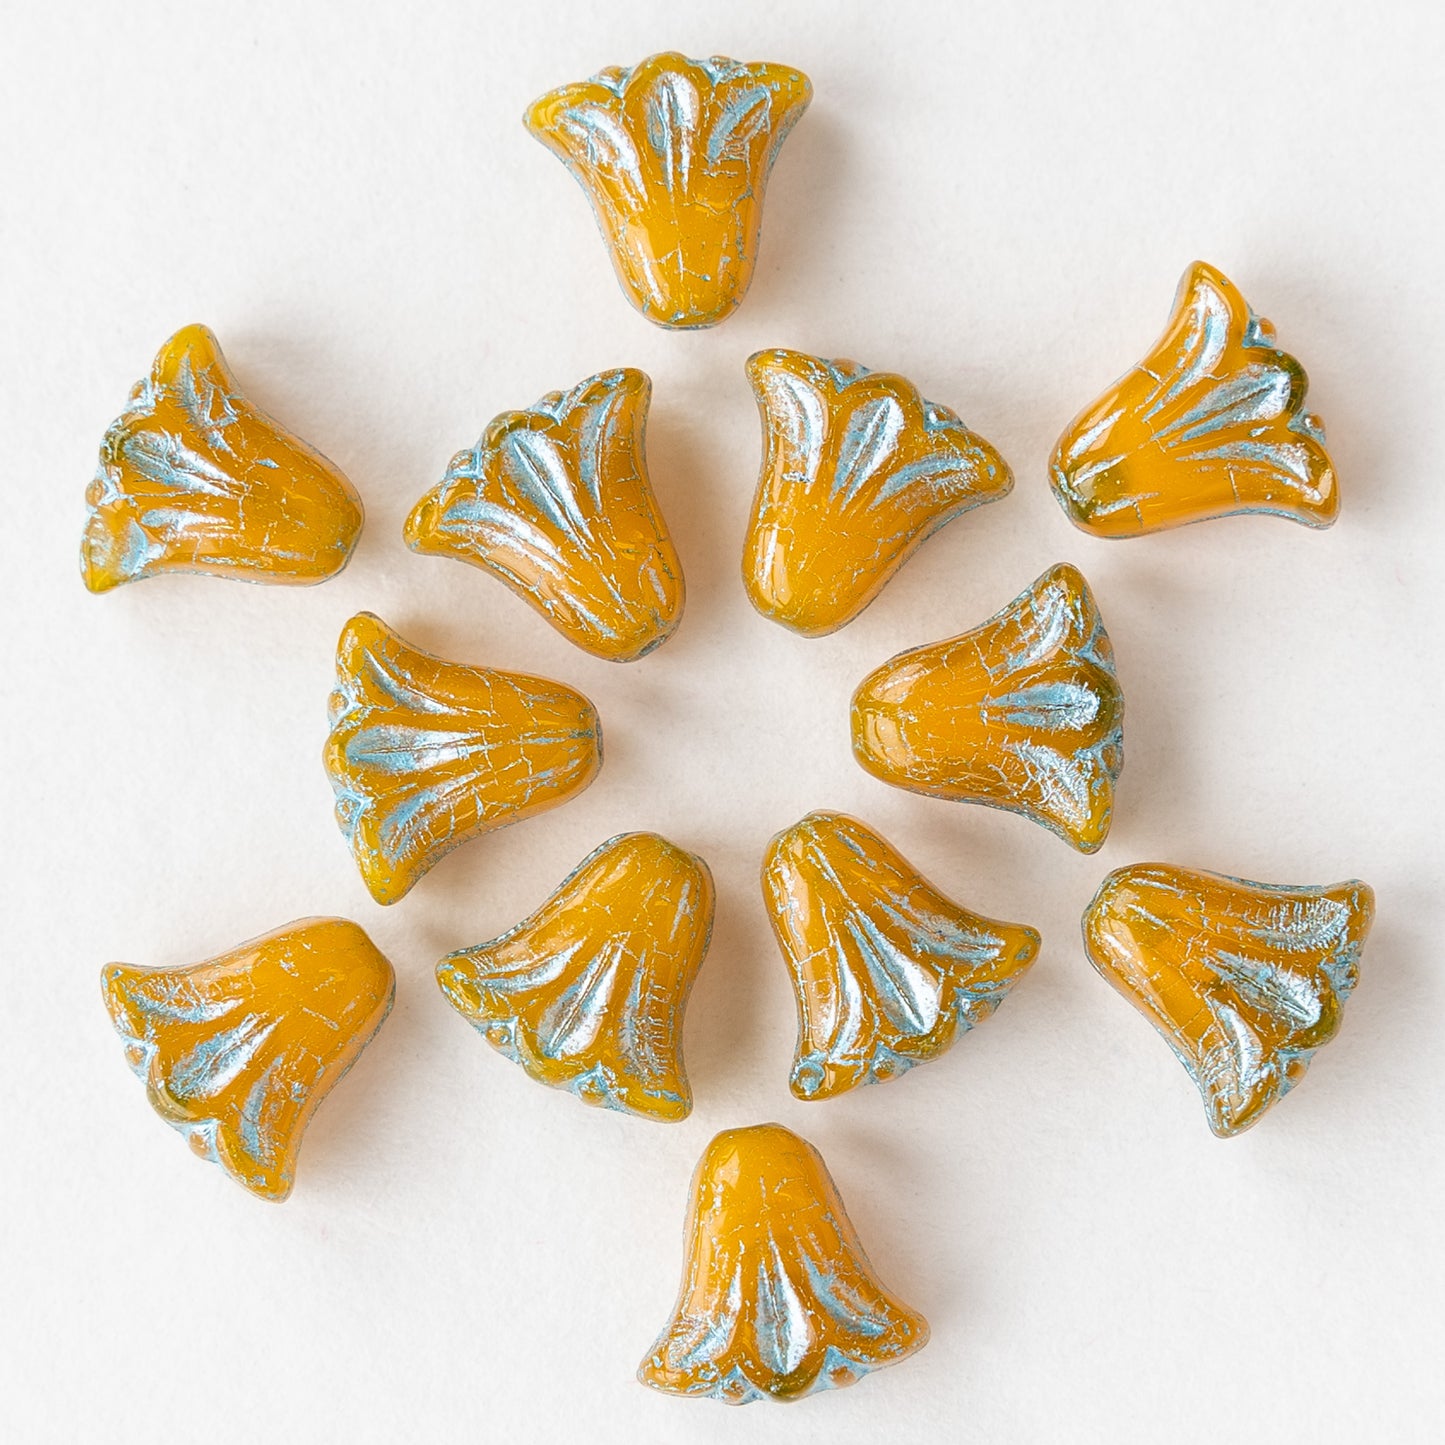 Load image into Gallery viewer, 9x10mm Lily / Tulip Flower Beads - Orange Opaline with Turquoise Wash - 15 Beads
